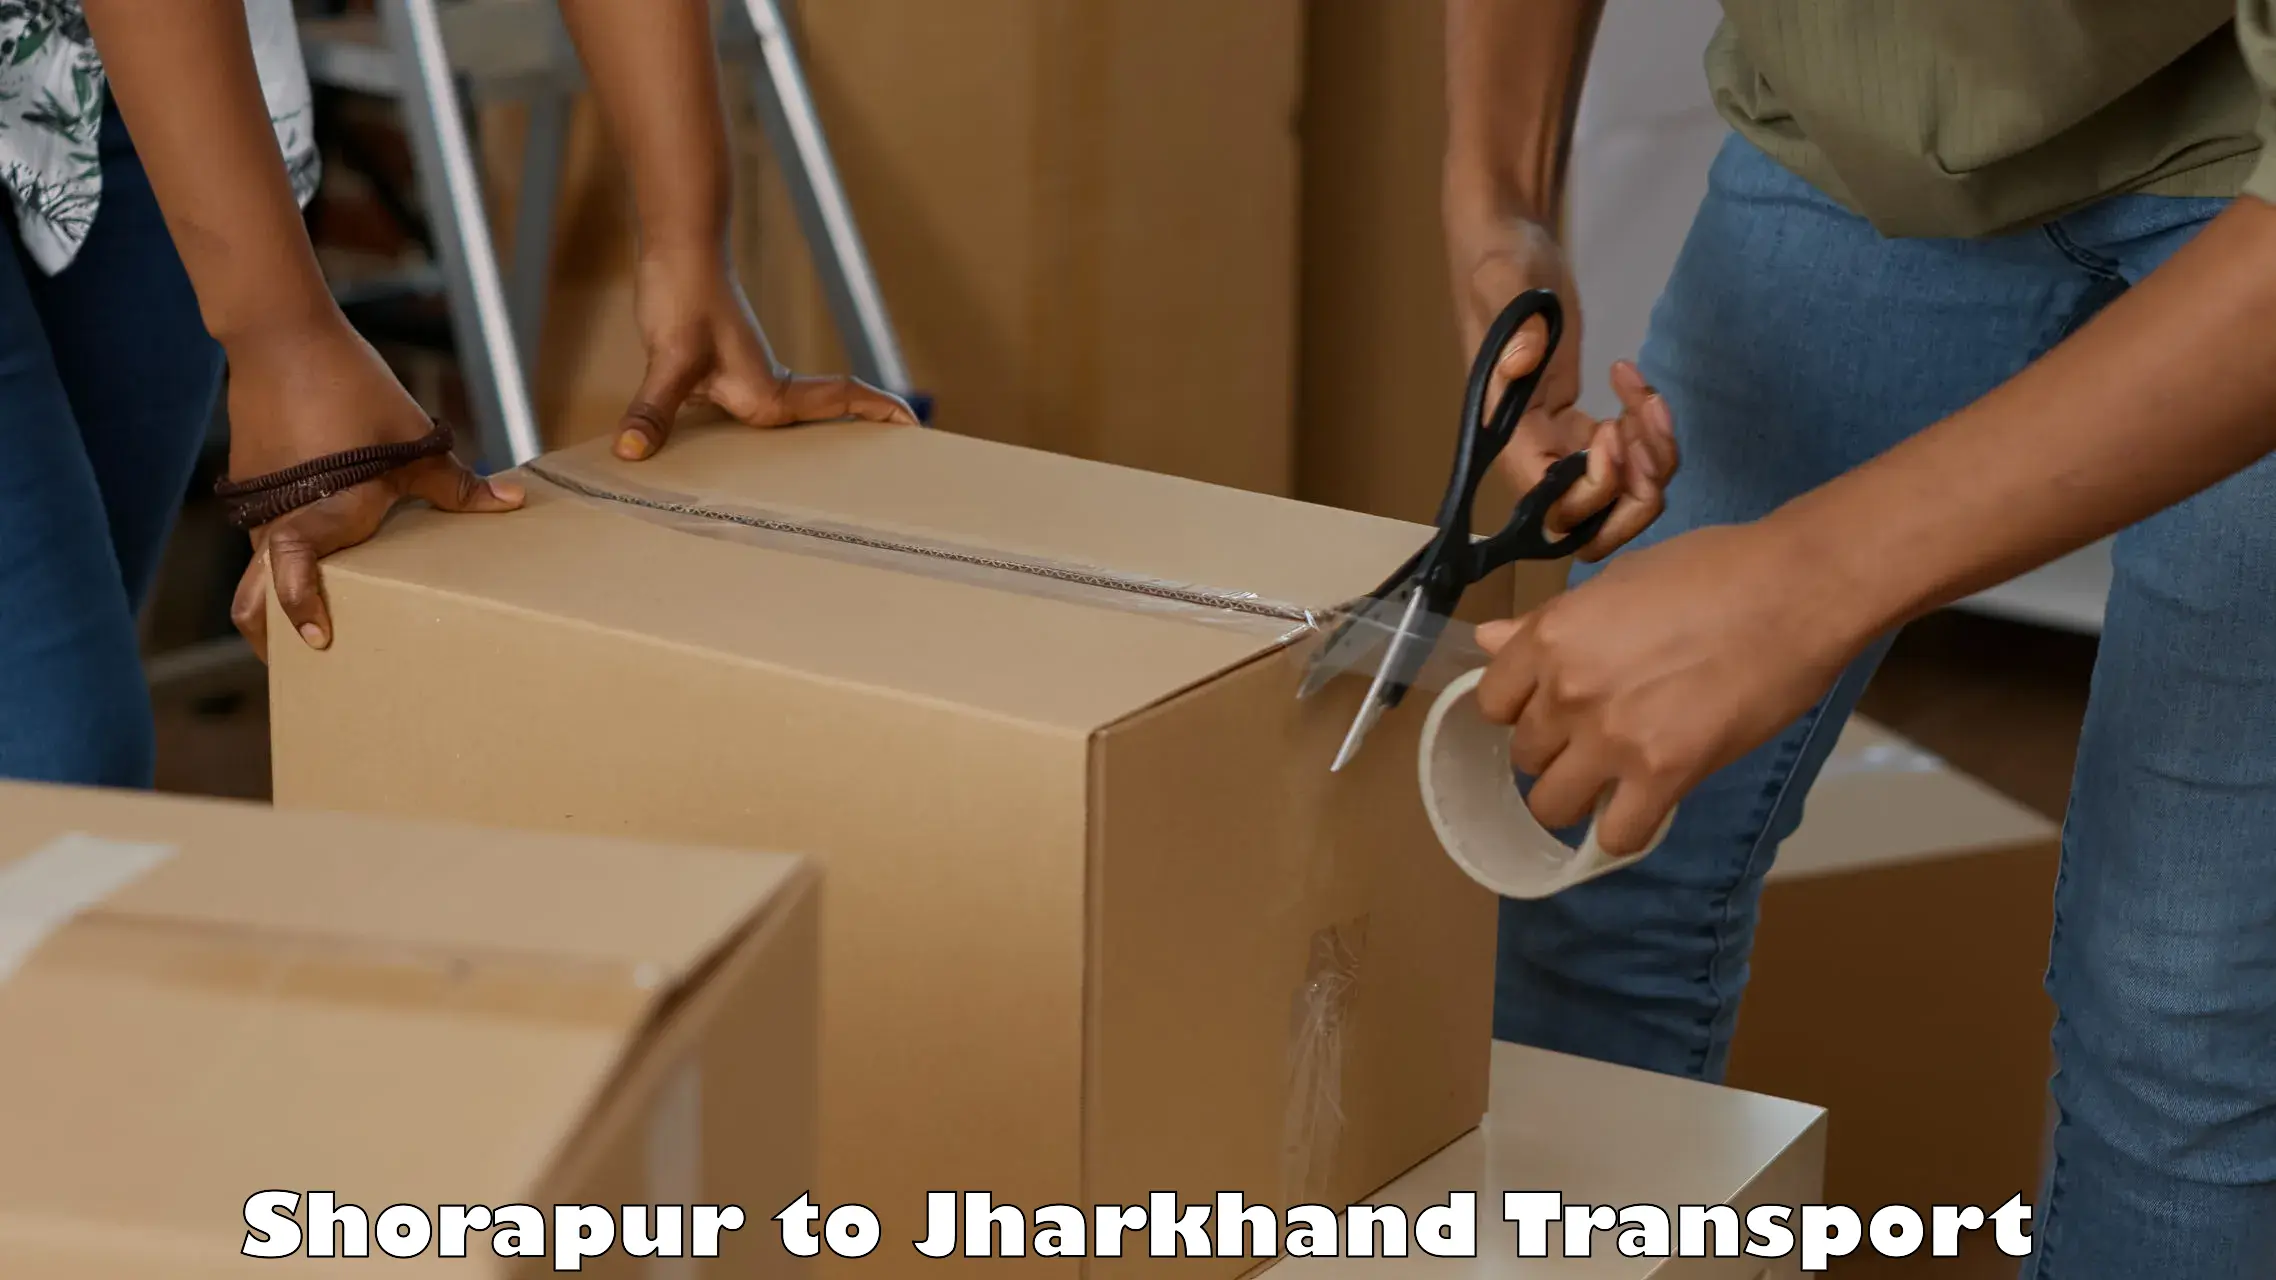 Transport bike from one state to another Shorapur to Jharkhand